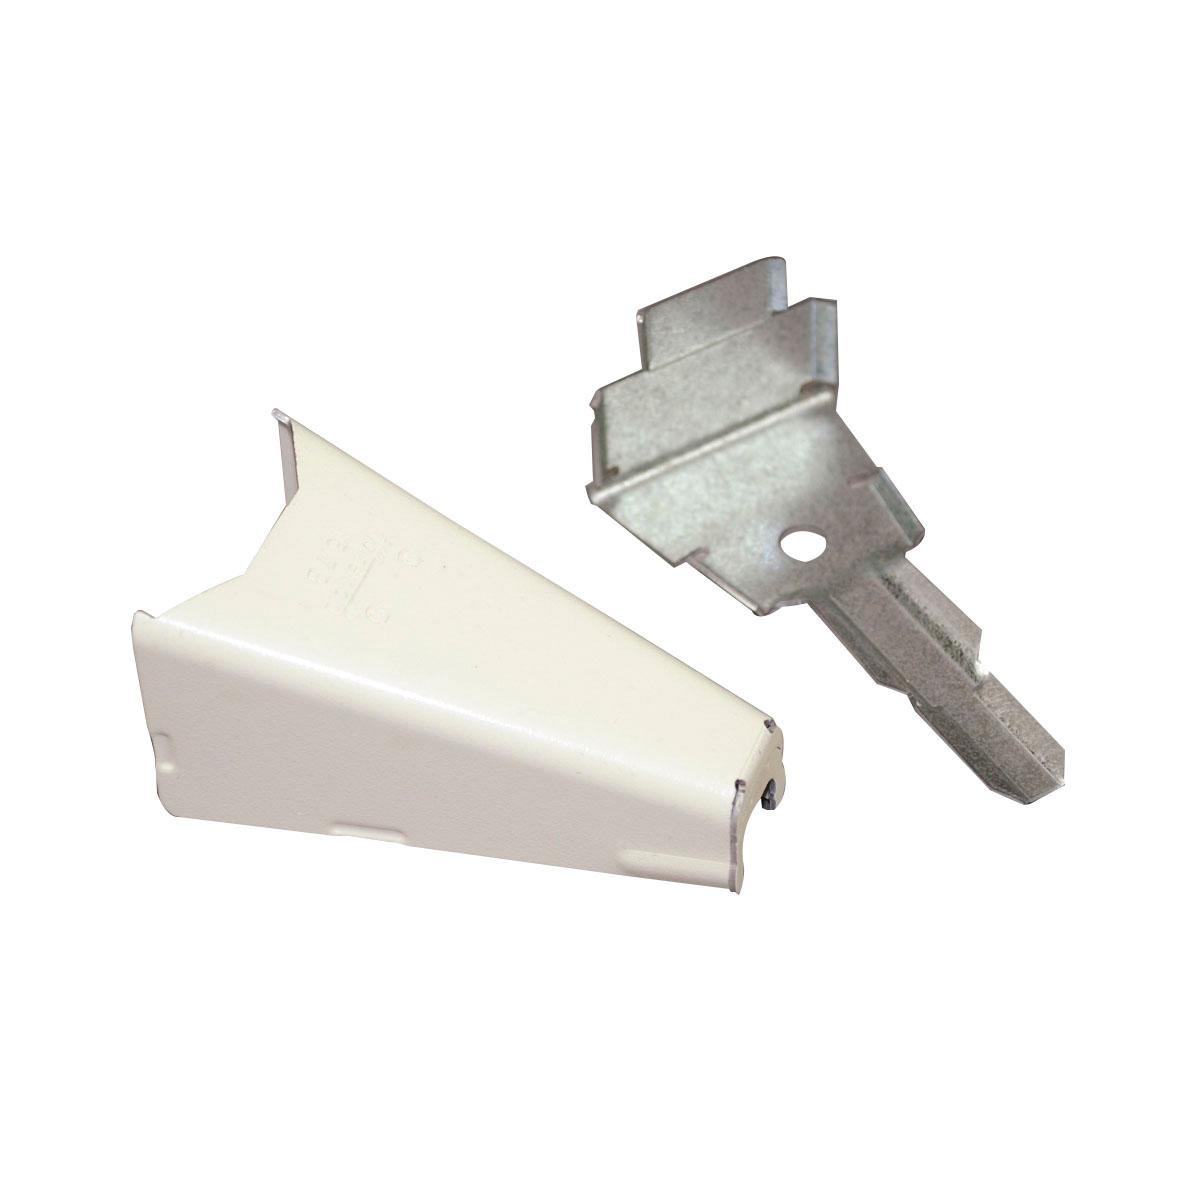 Wiremold V1517b Adapter Fitting Steel Ivory For Use With 1500